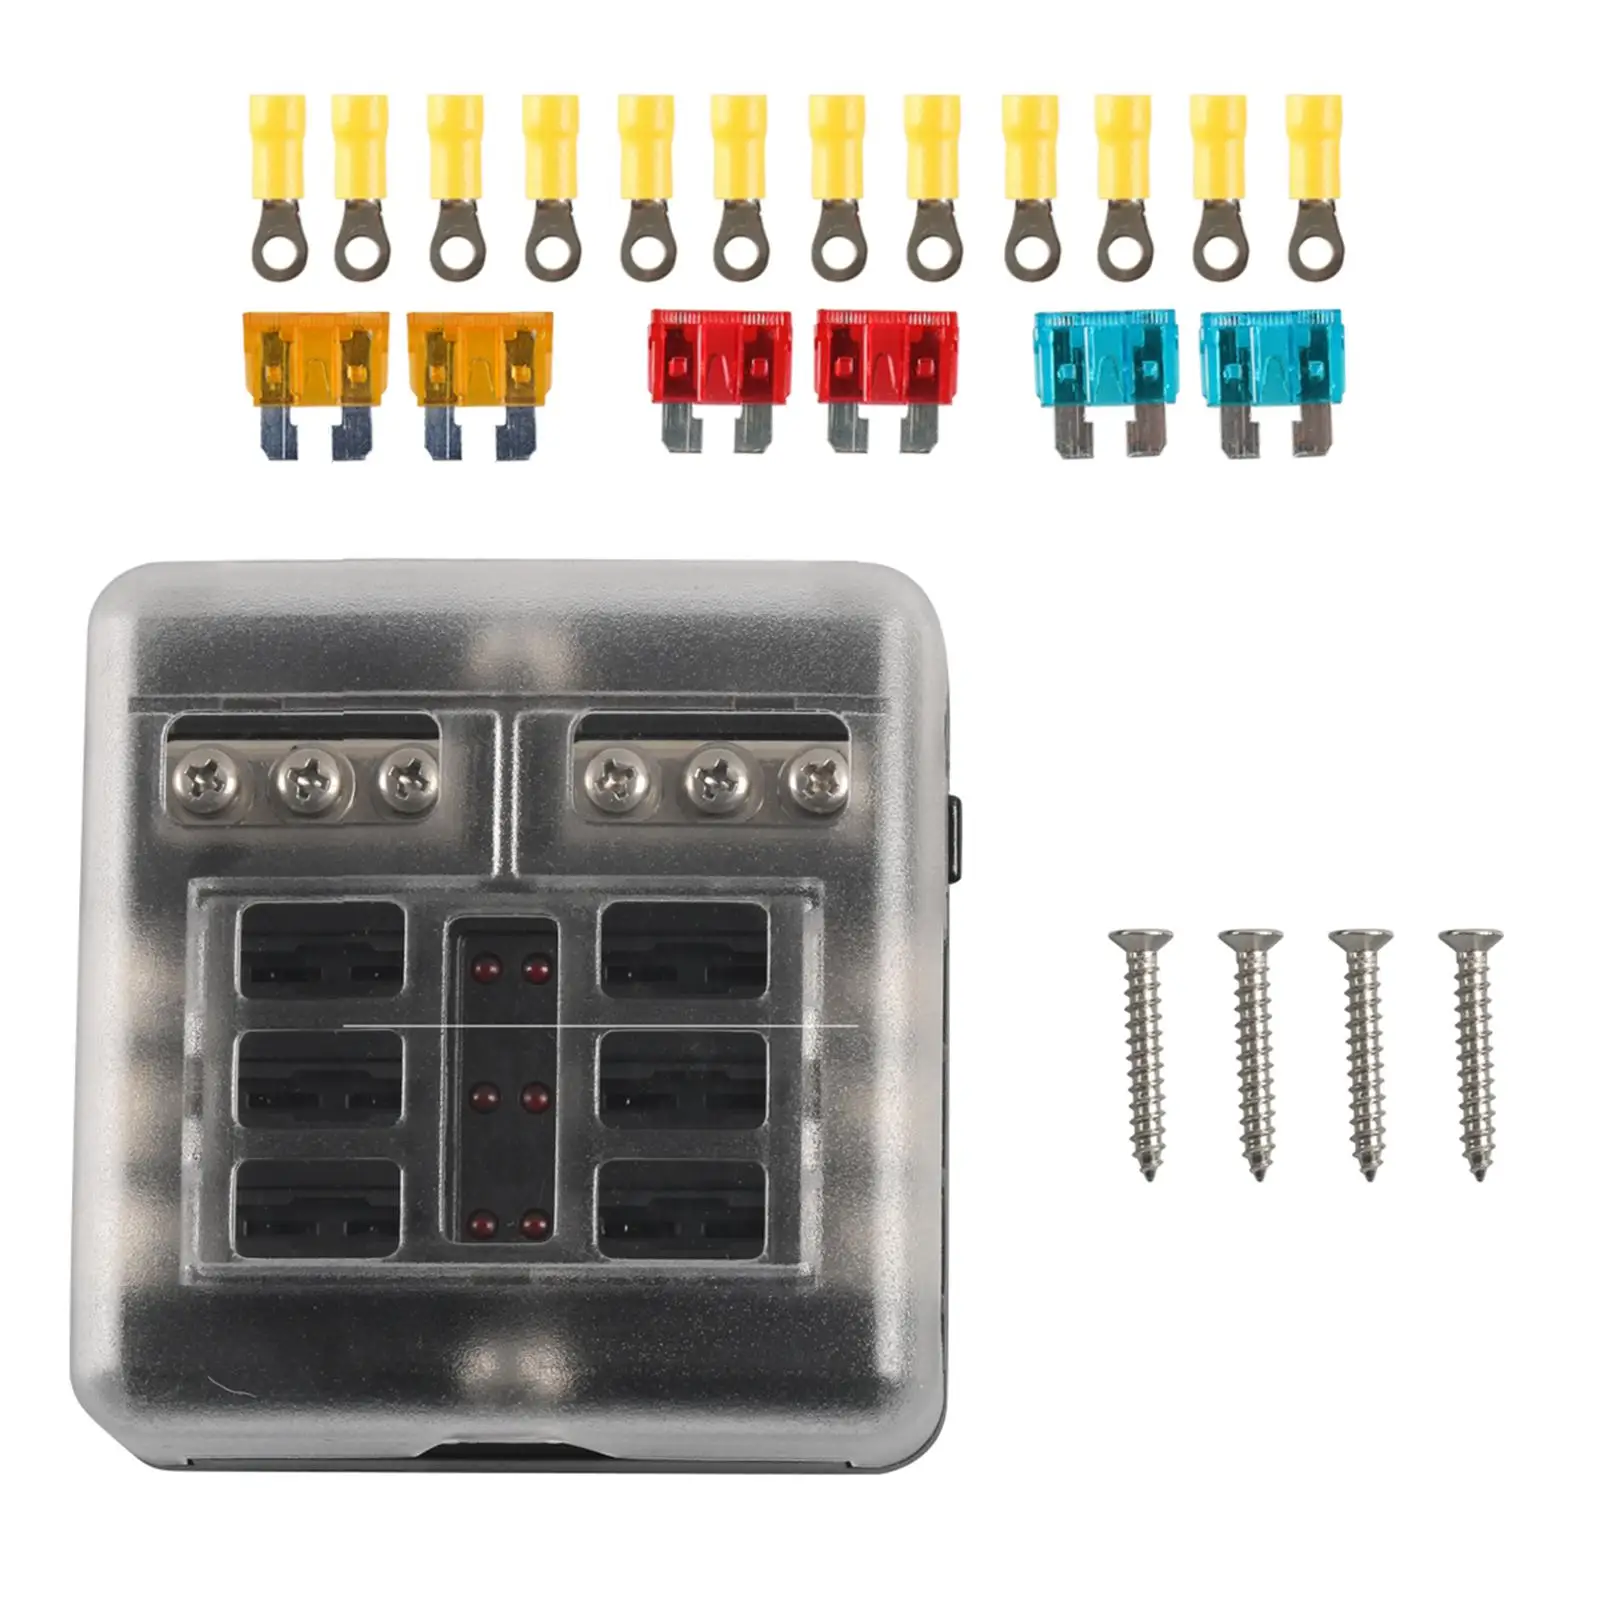 6 Way Blade Fuse Block LED Indicator with 15A 10A 5A Fuses W/Negative Damp Proof 6 Circuit Fuse Box Holder Fit for Marine Car